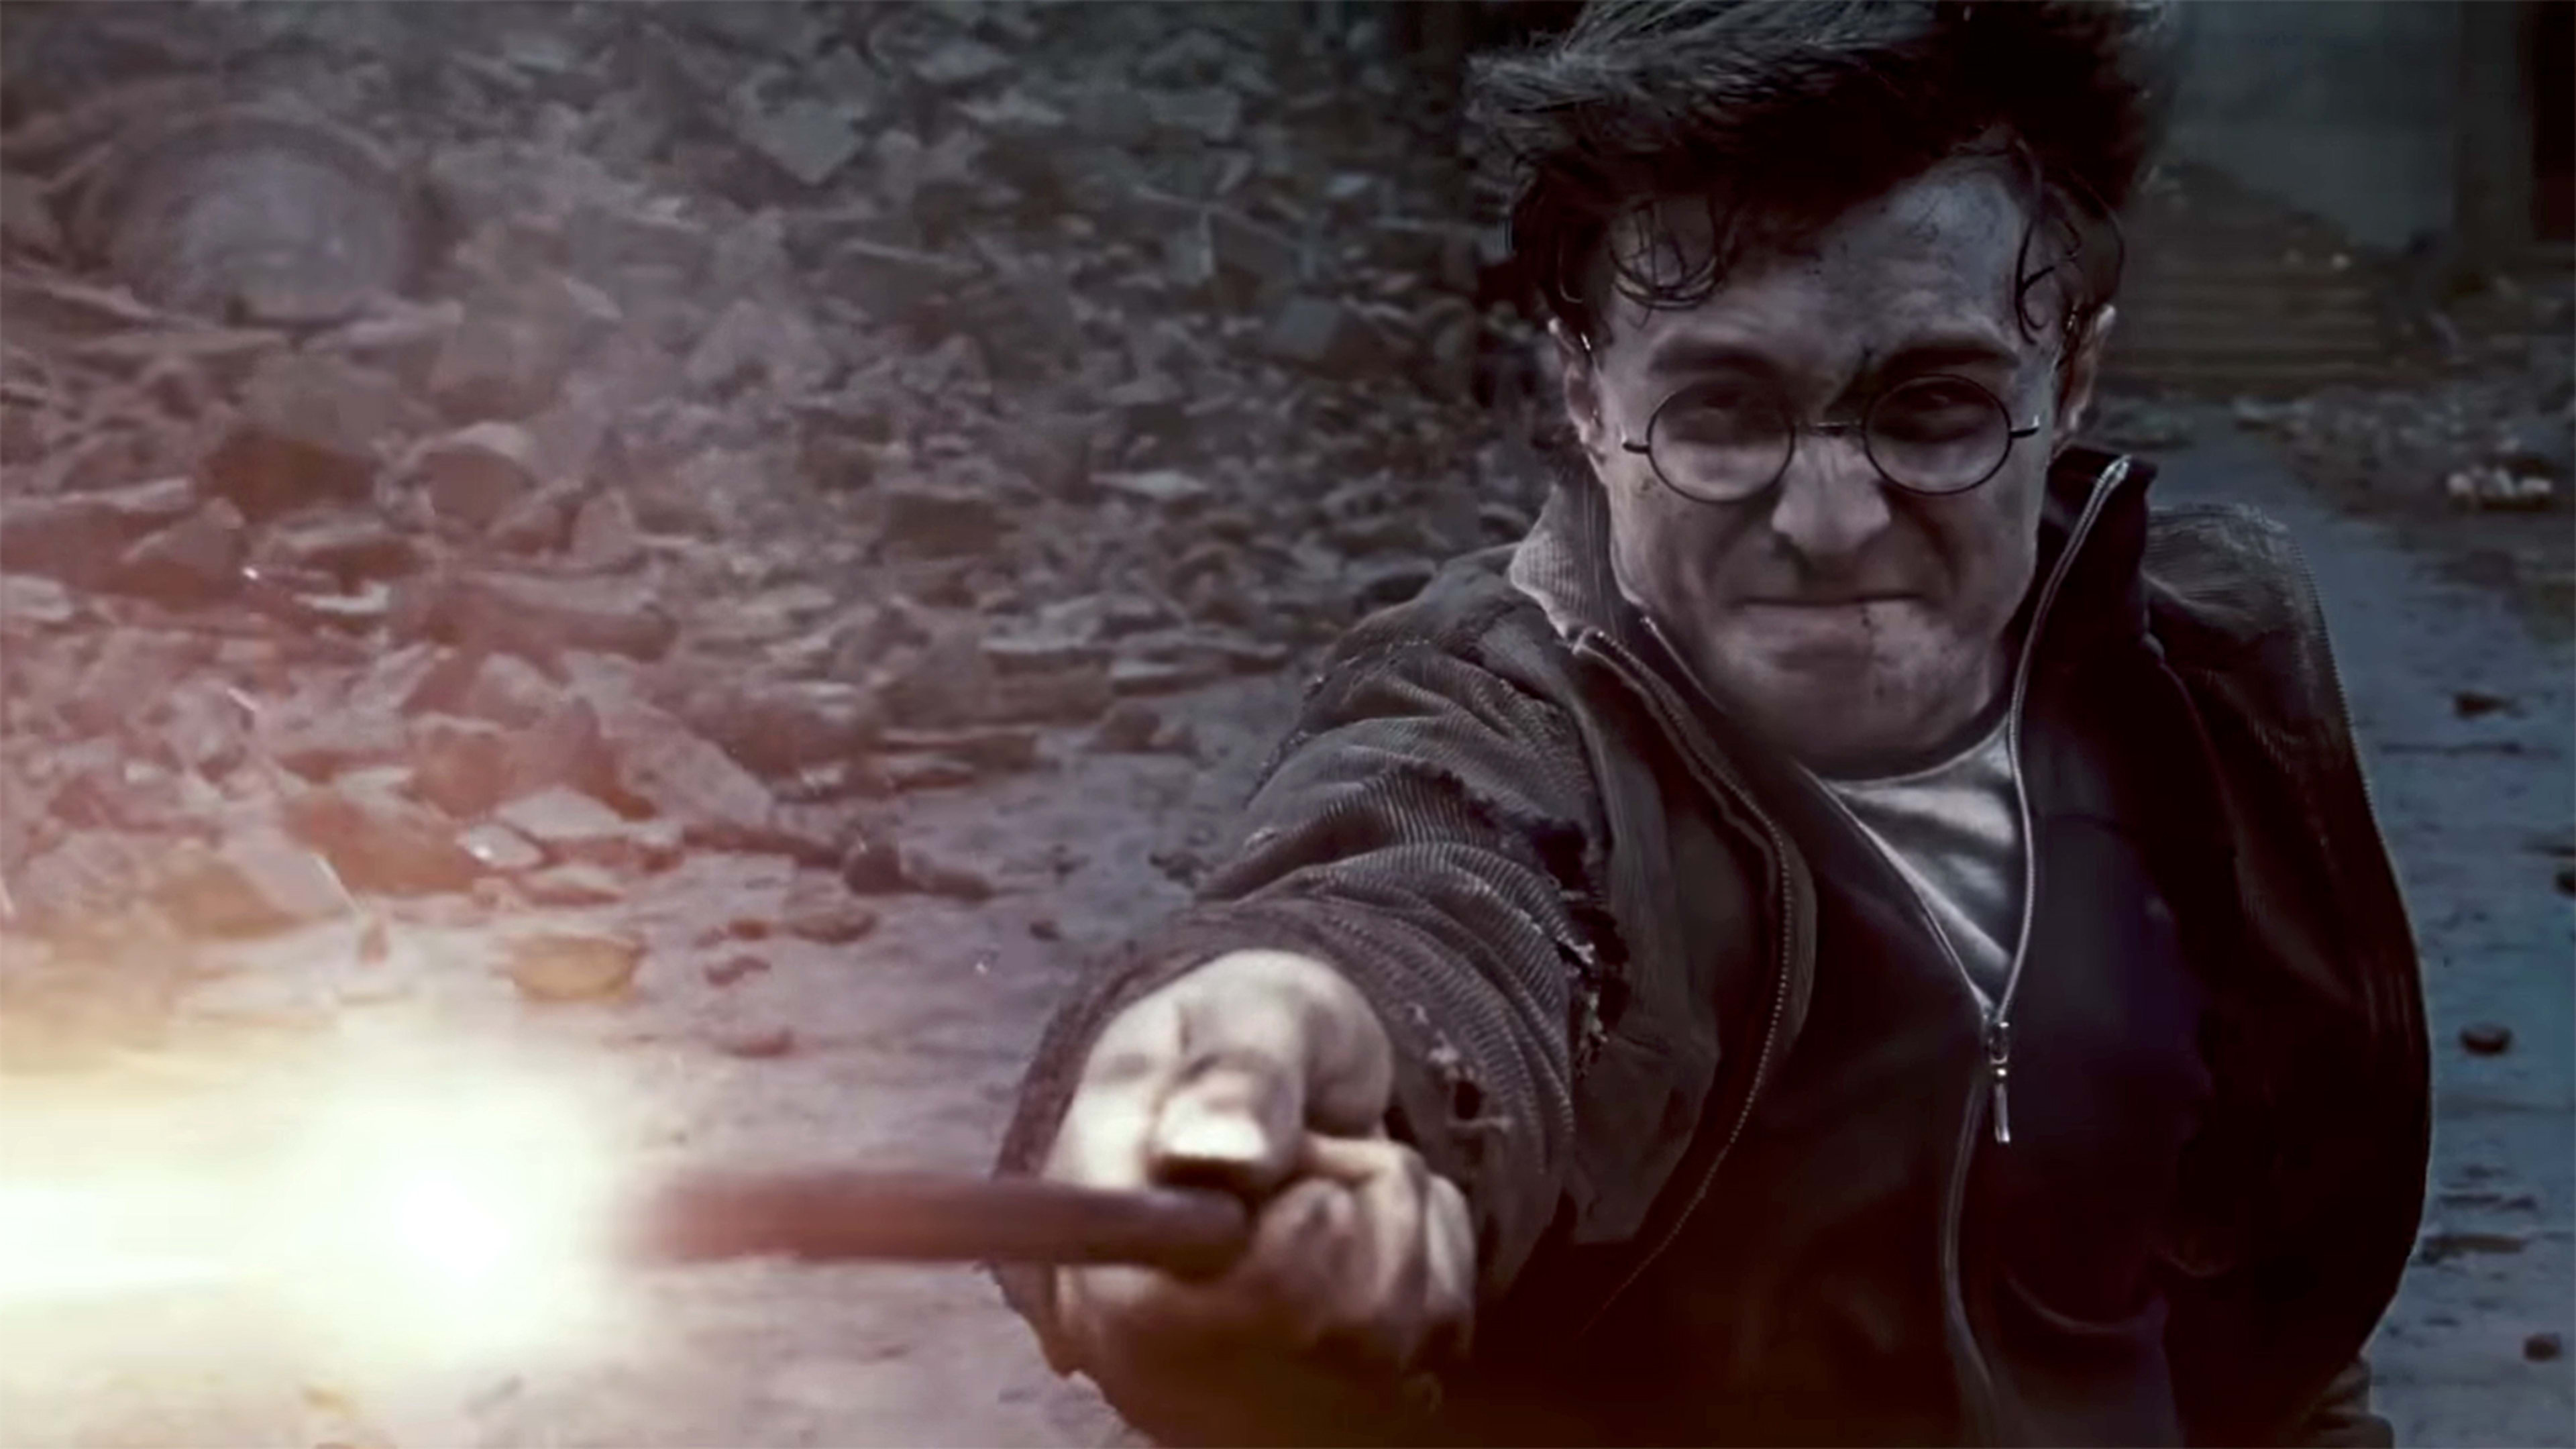 The $25 billion question: Is Harry Potter a blessing or a curse for AT&T TimeWarner?